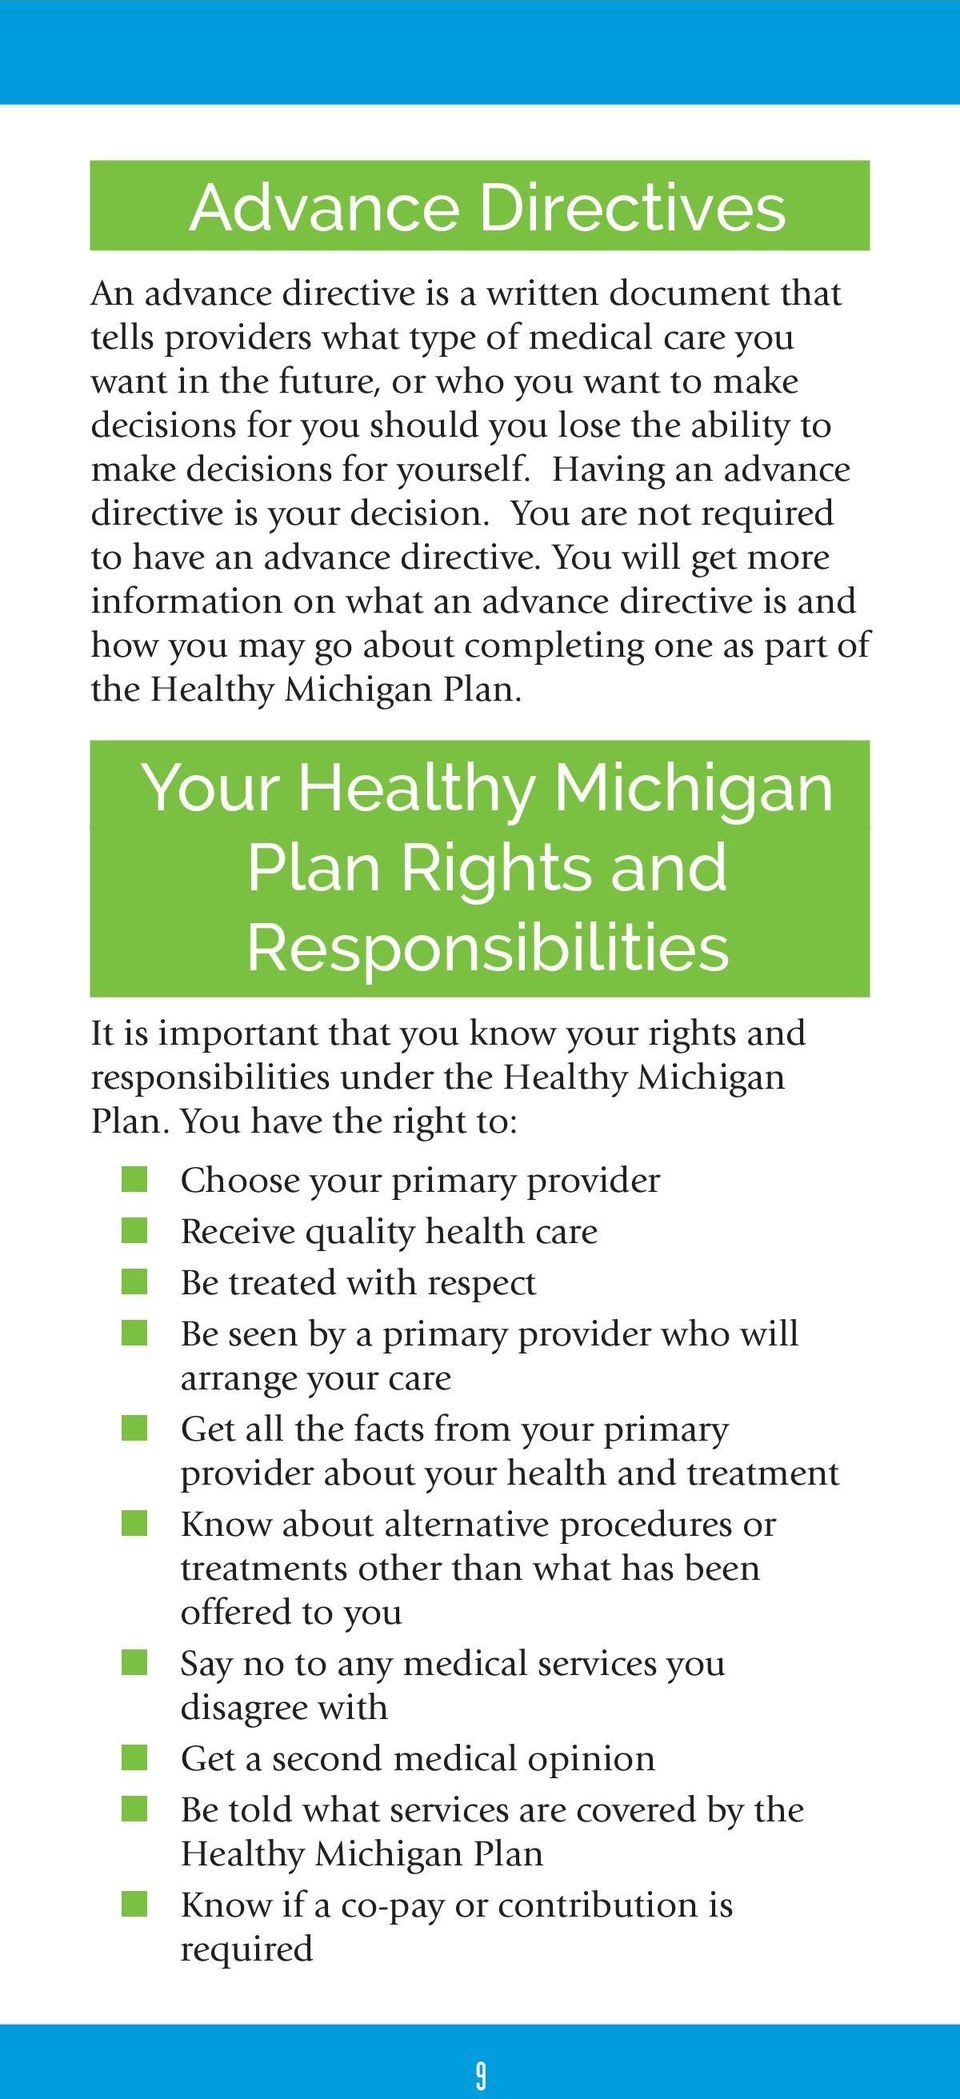 You will get more information on what an advance directive is and how you may go about completing one as part of the Healthy Michigan Plan.